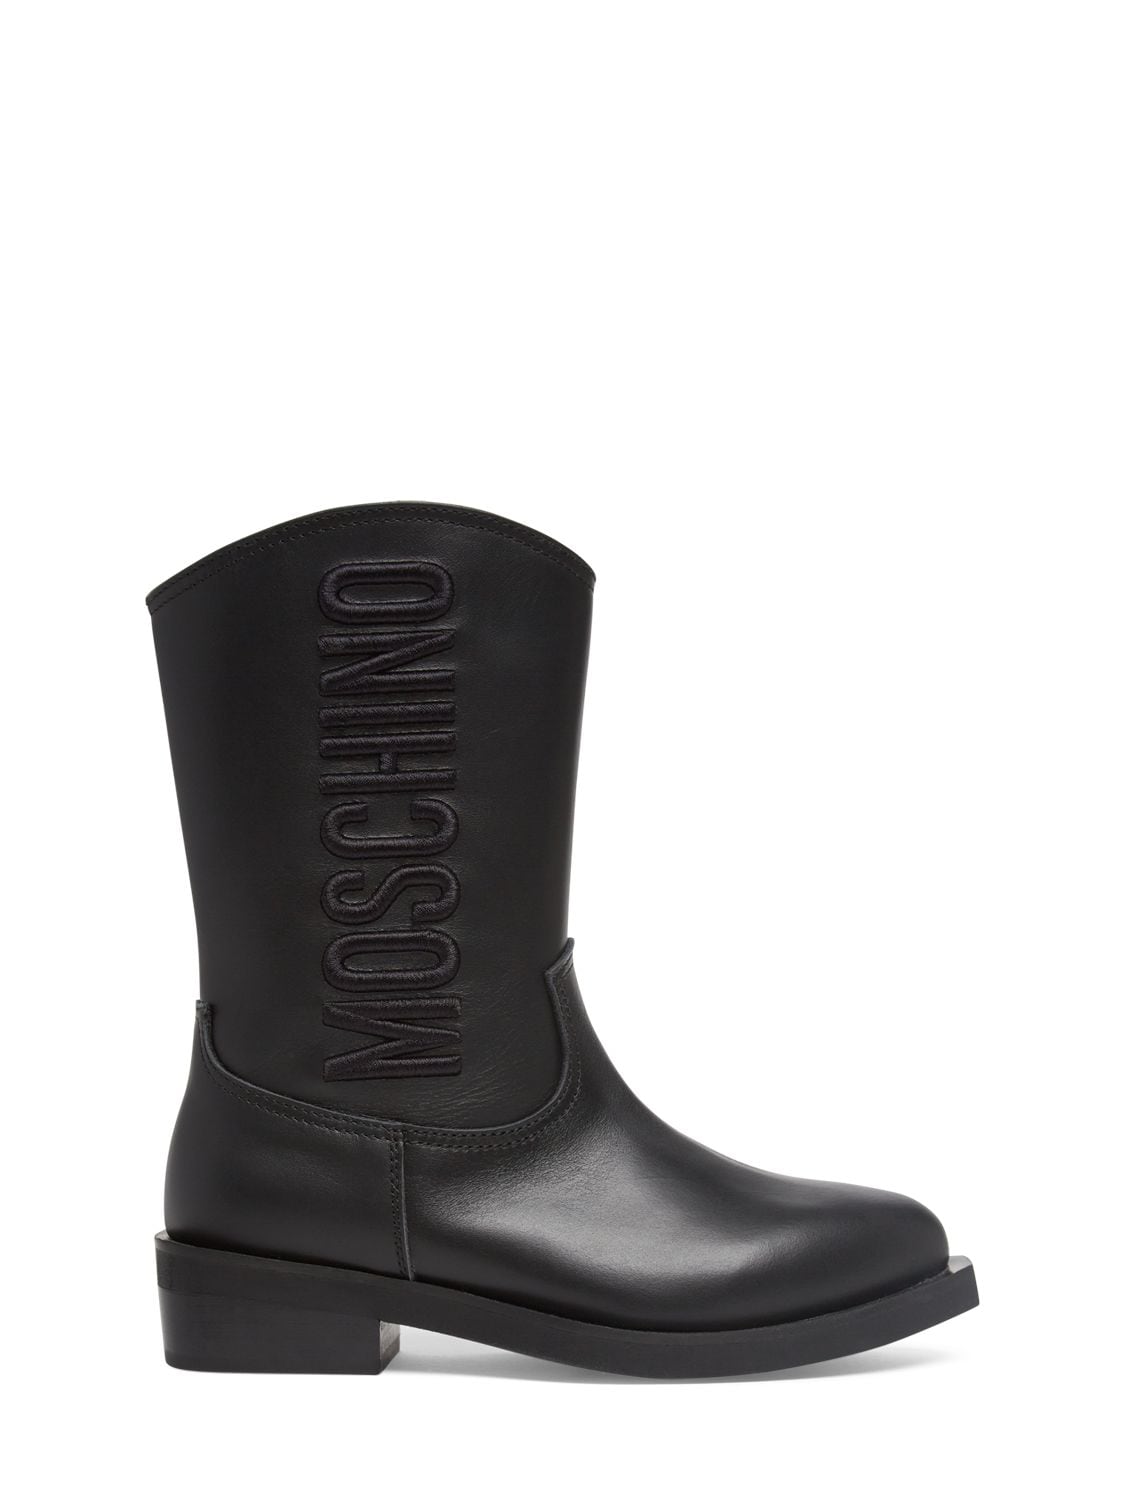 Image of Leather Texano Boots W/logo